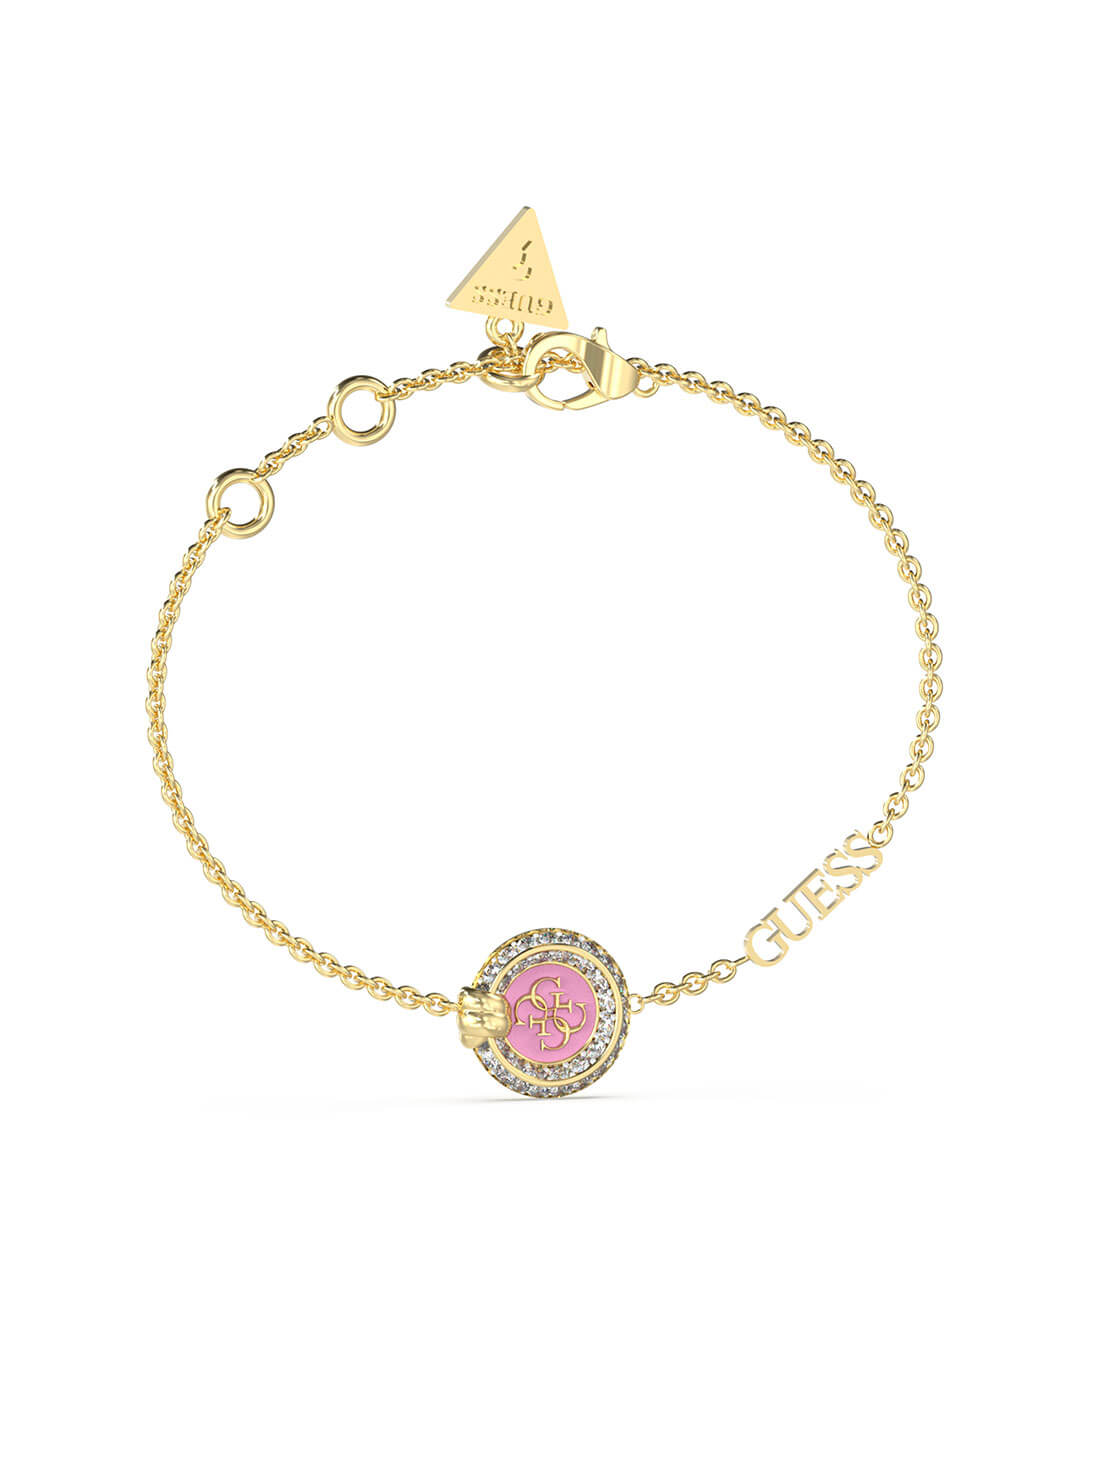 Gold Knot You Pink Crystal Bracelet | GUESS Women's Jewellery | front view